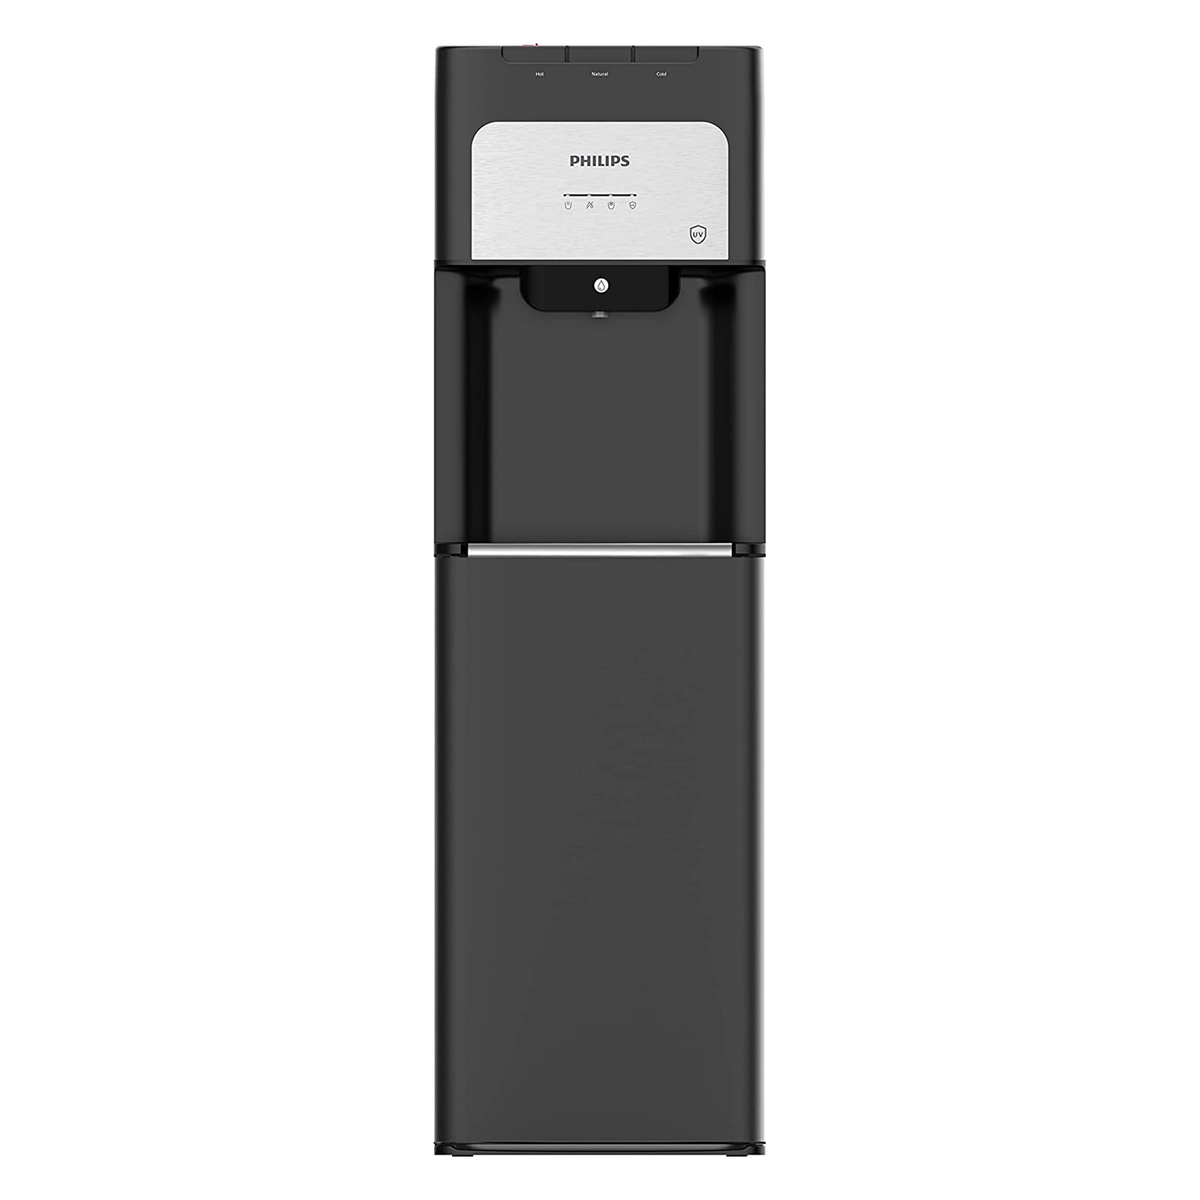 Philips Bottom Load Water Dispenser with UV-LED Disinfection + Micro P-Clean Filtration, Black, ADD4972BKS/56